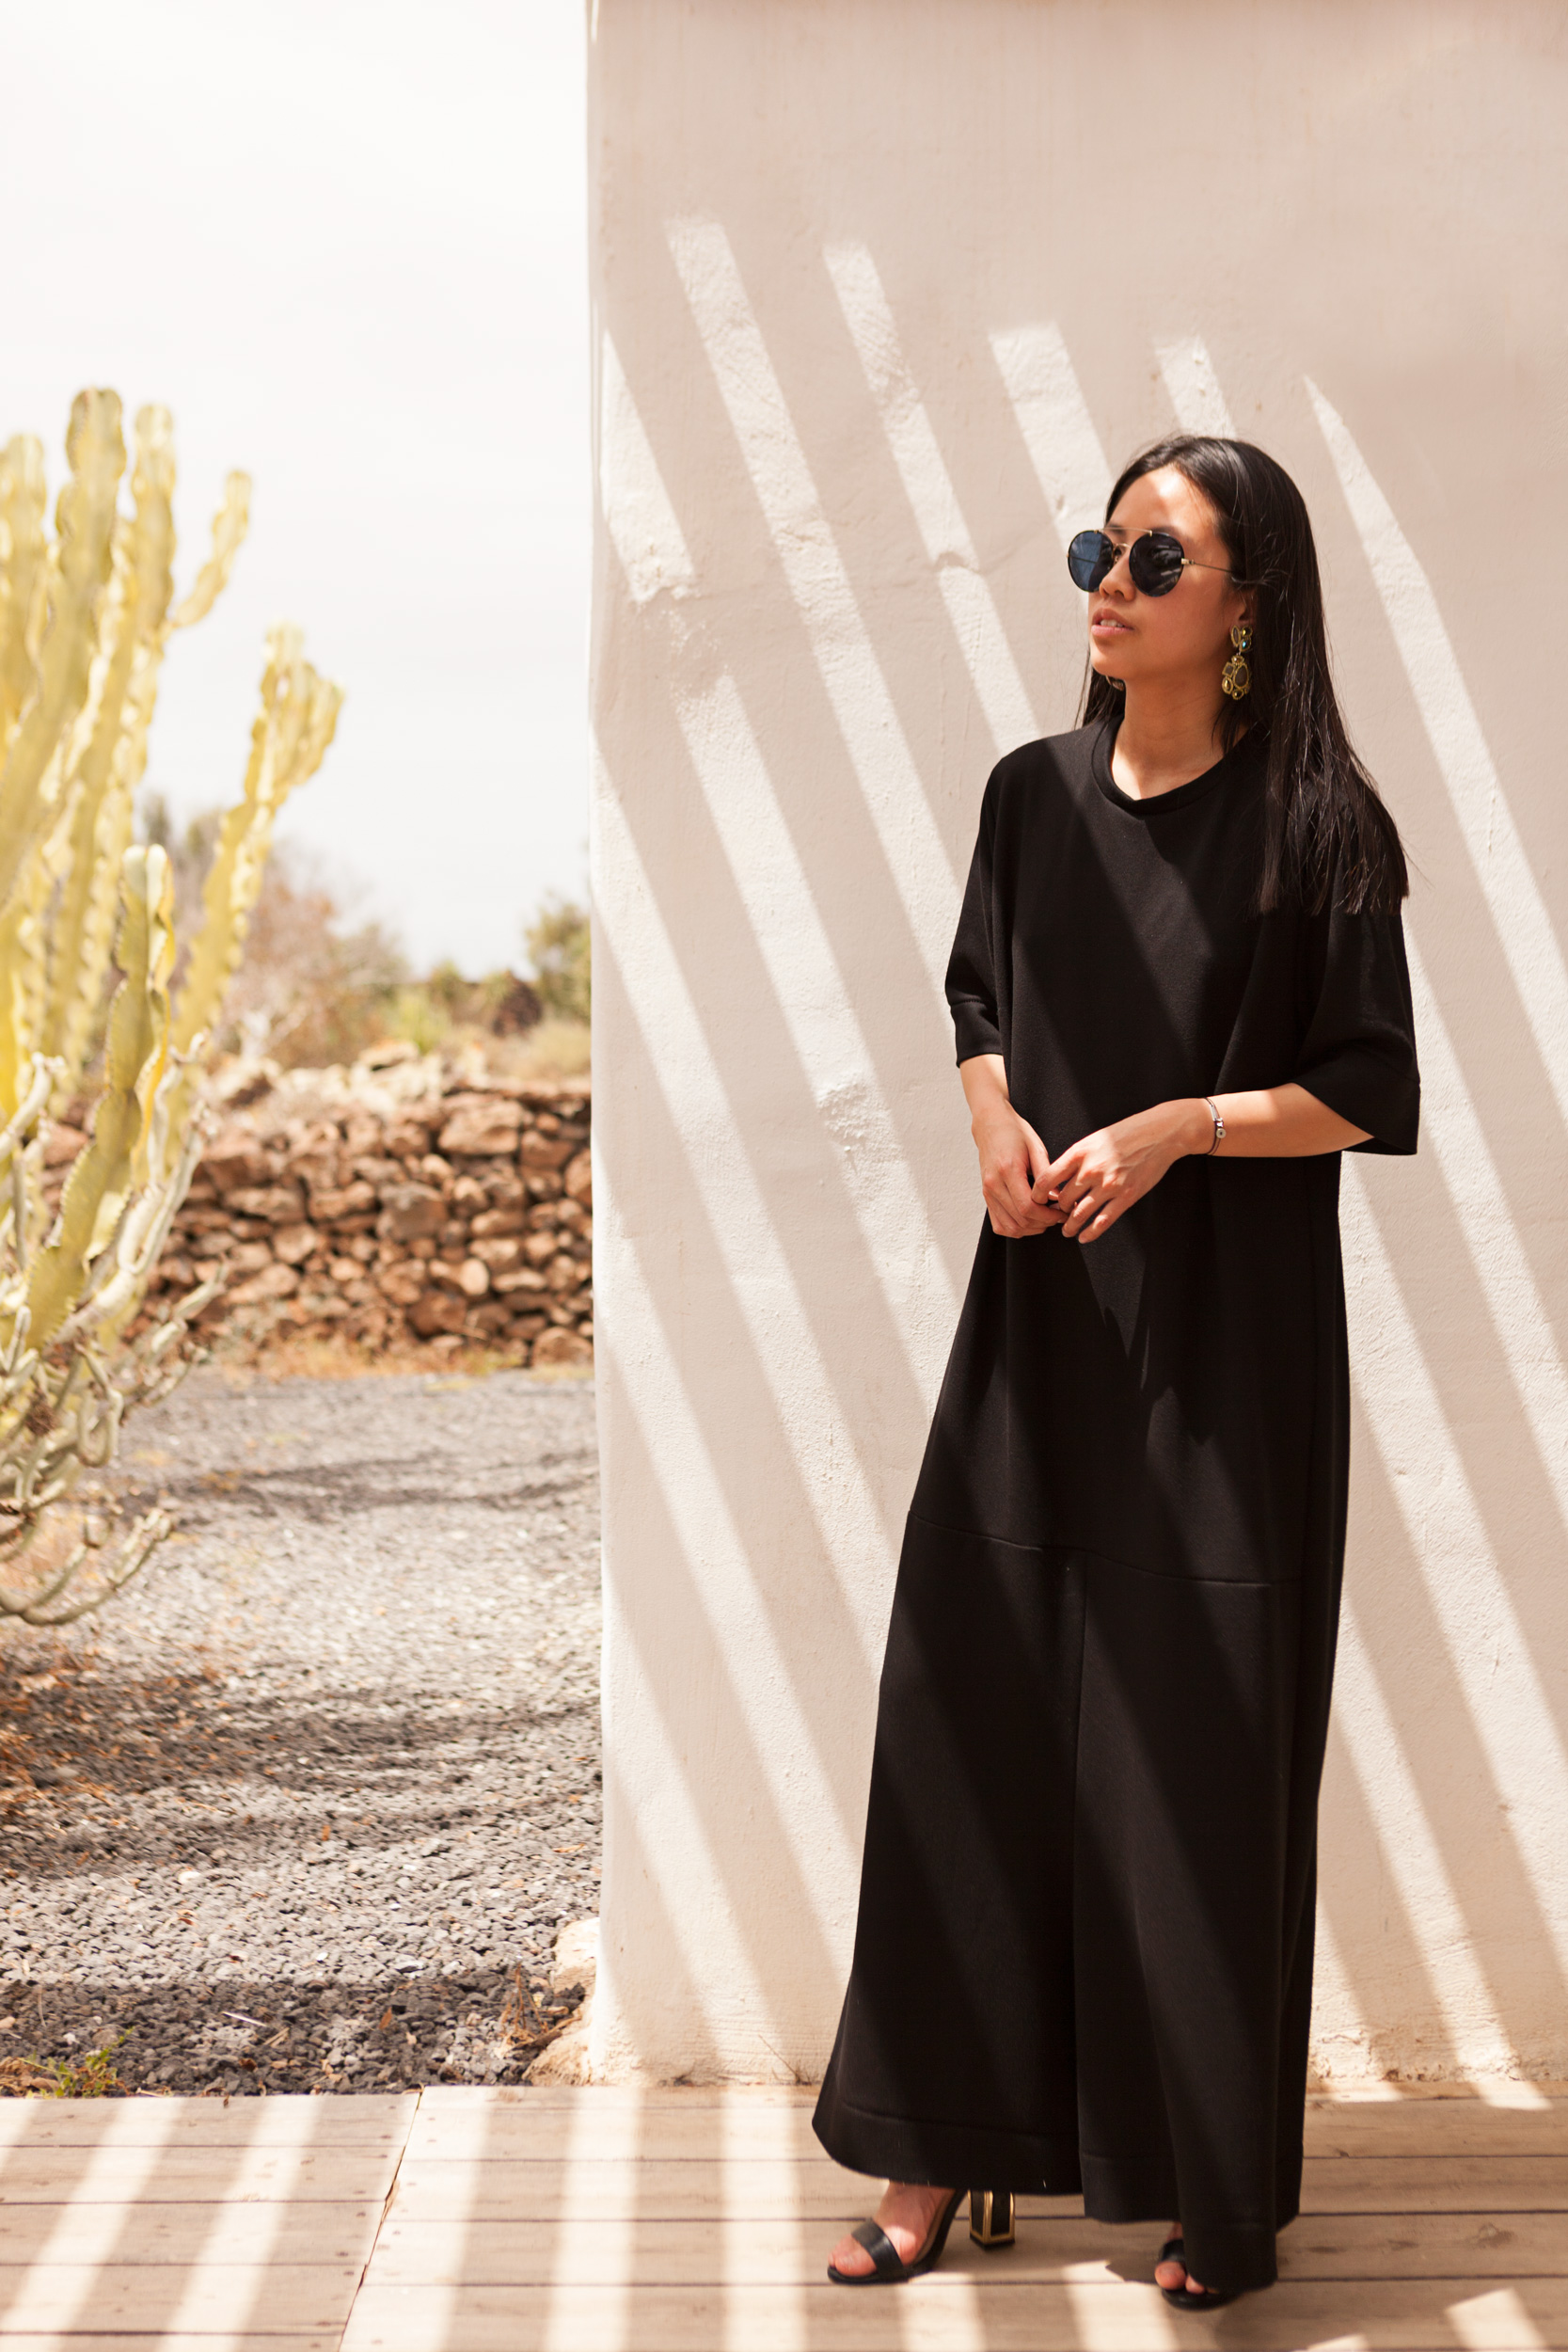 IHEARTALICE.DE – Fashion & Travel-Blog from Germany/Berlin by Alice M. Huynh: Oversize WE.RE Jumpsuit in Fuerteventura 